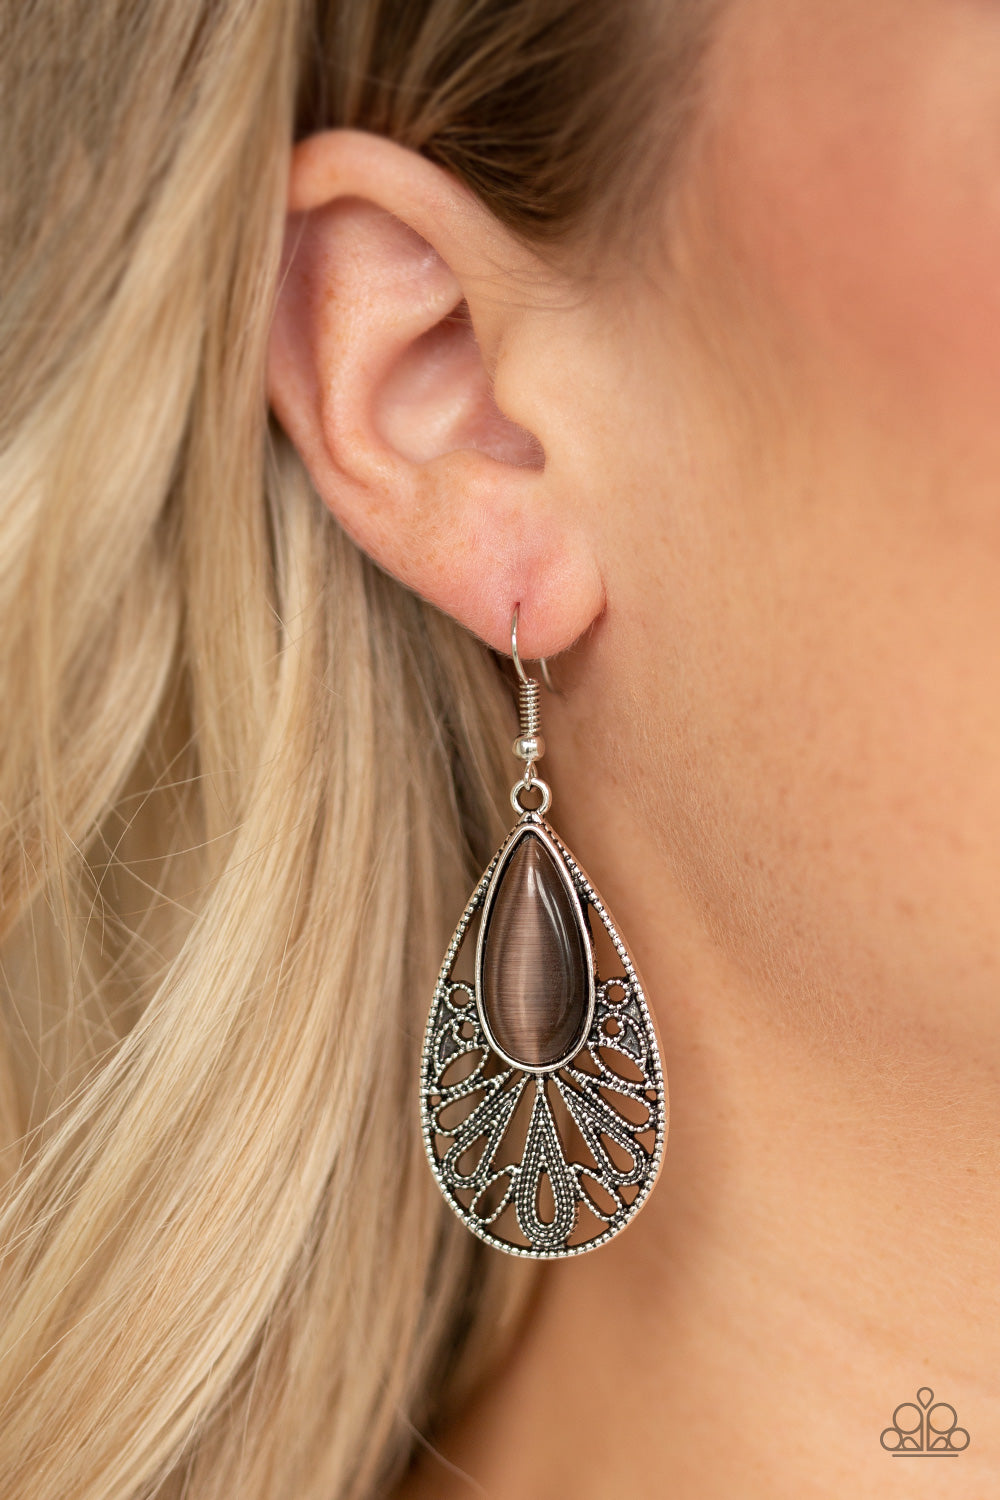 Glowing Tranquility - Brown Earrings - Paparazzi Accessories